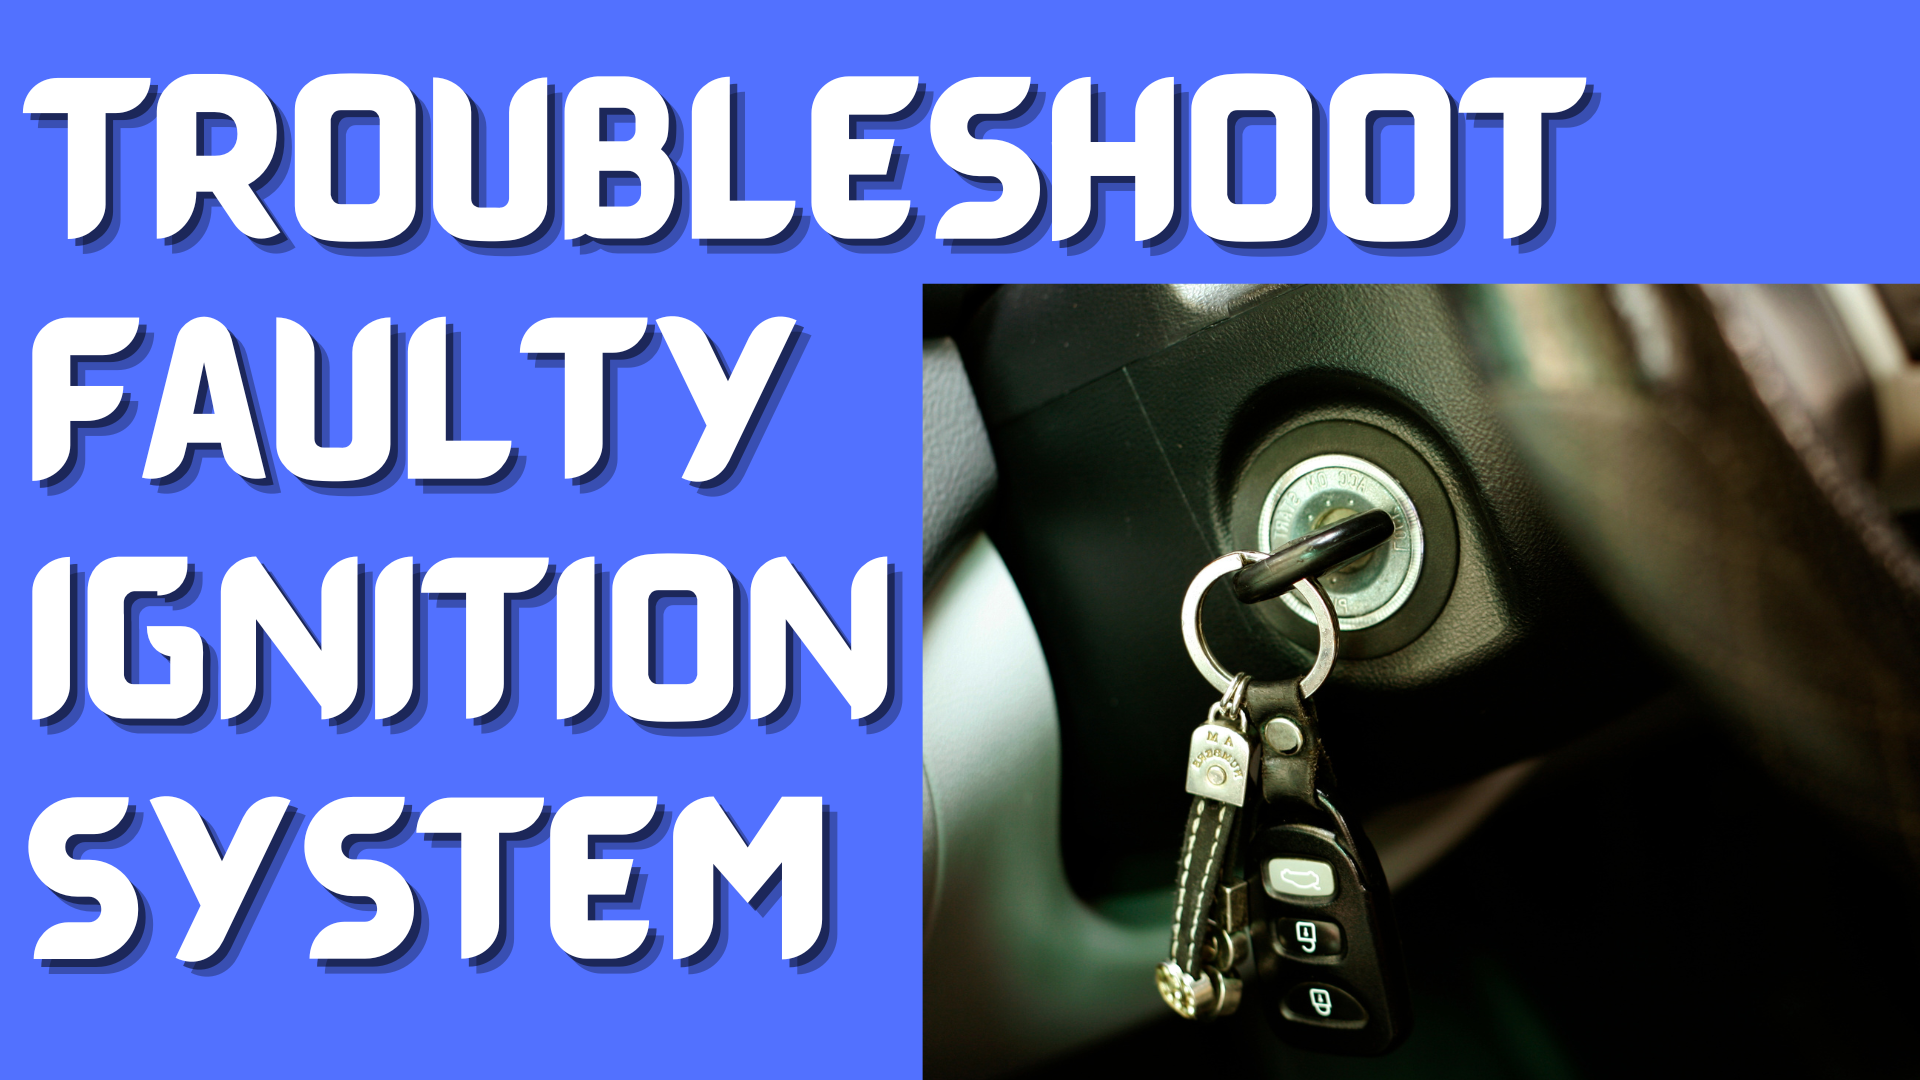 How To Troubleshoot Faulty Ignition System of a Truck Easily